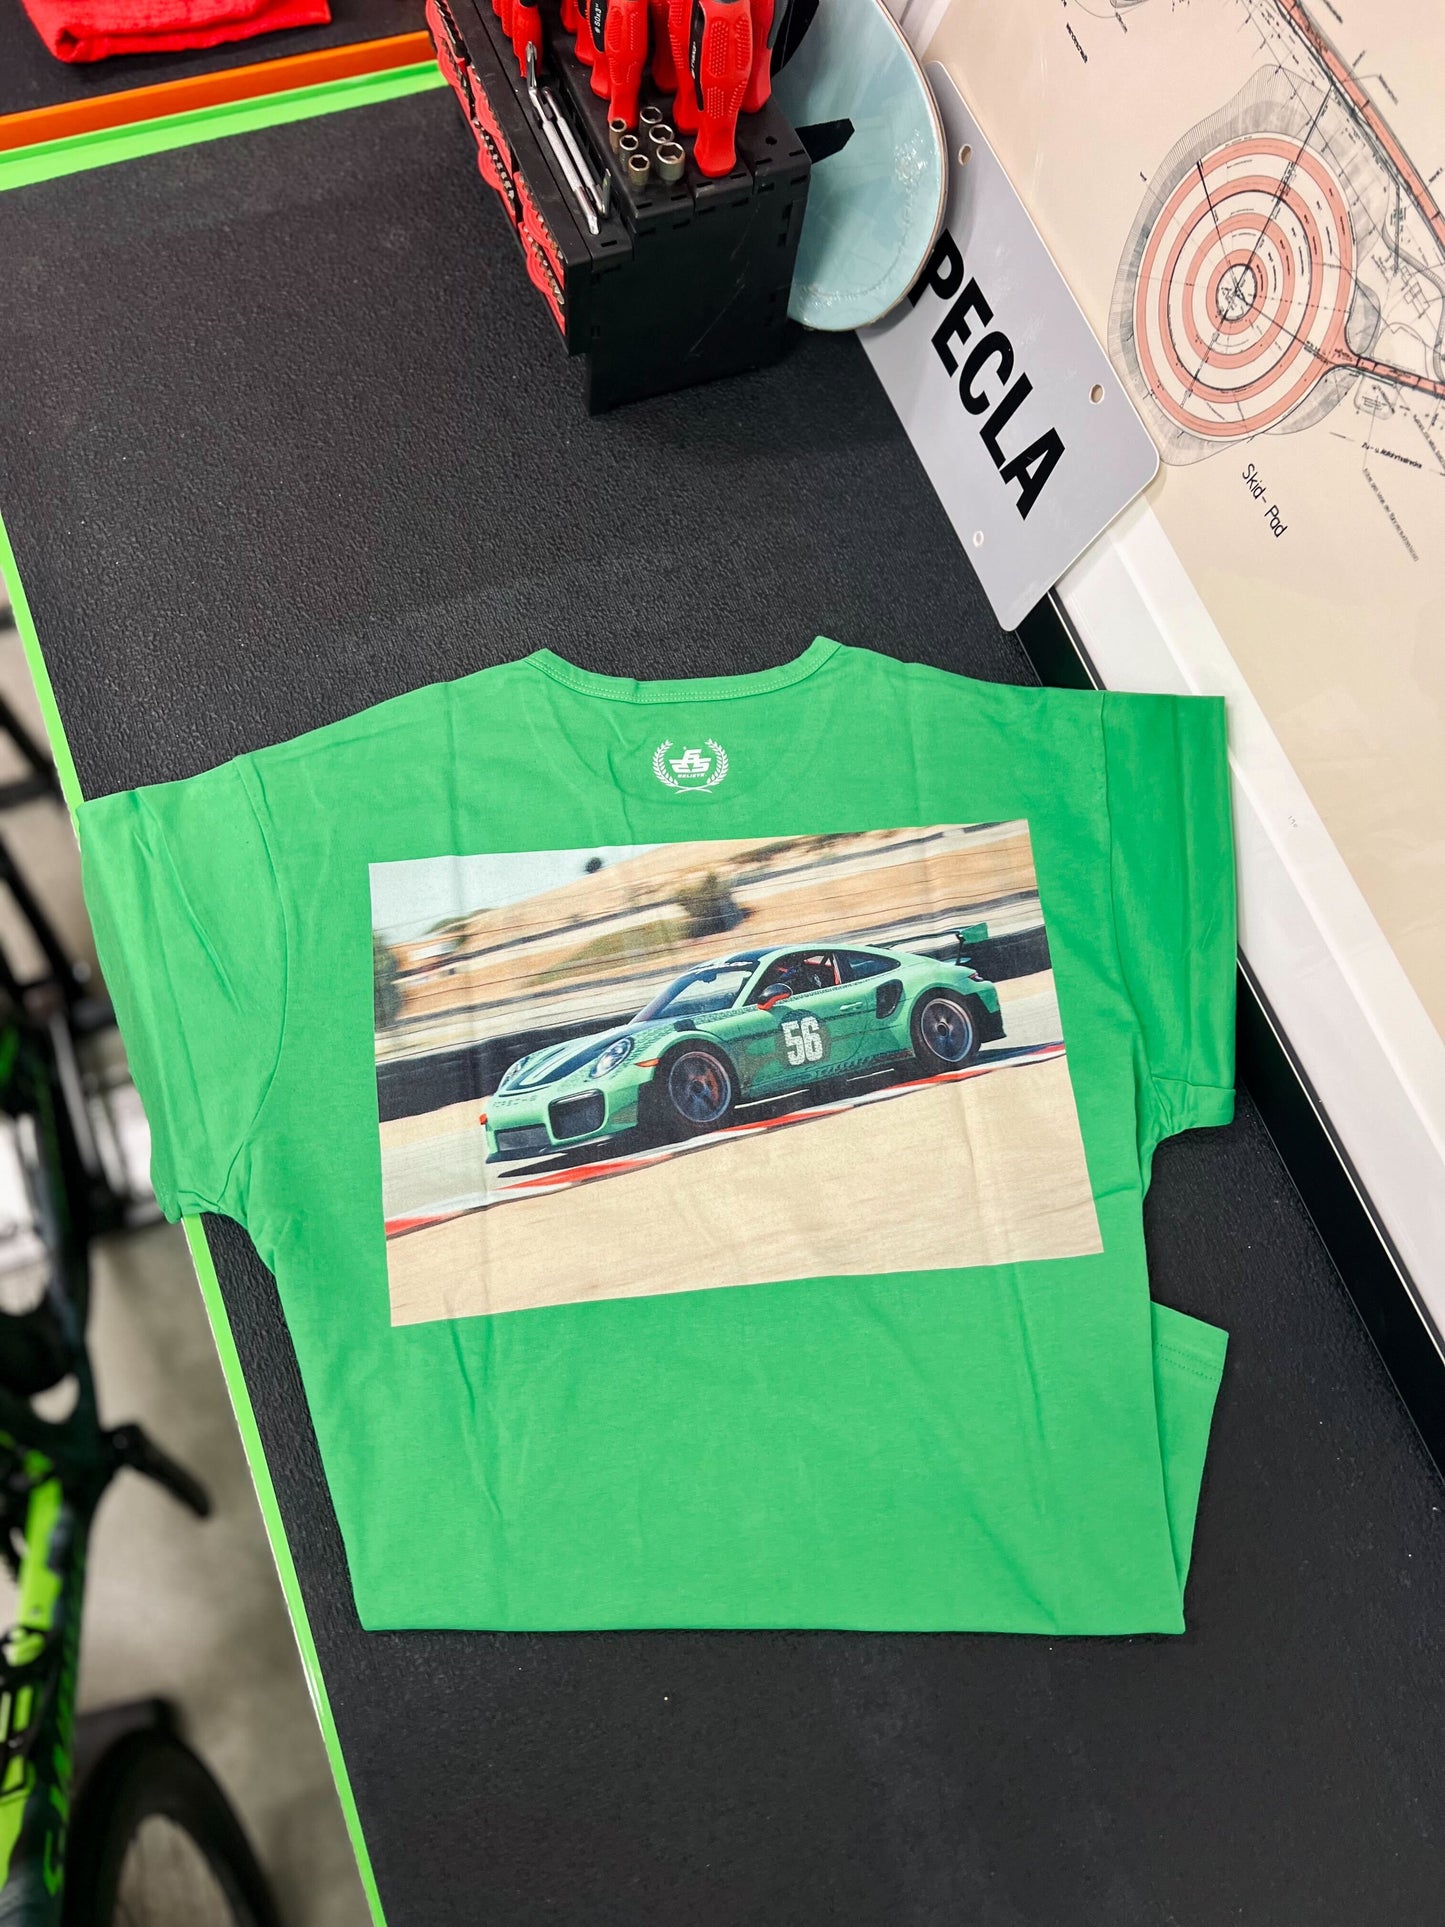 OLOI Private Collection LIMITED Tee - GT2RS Green